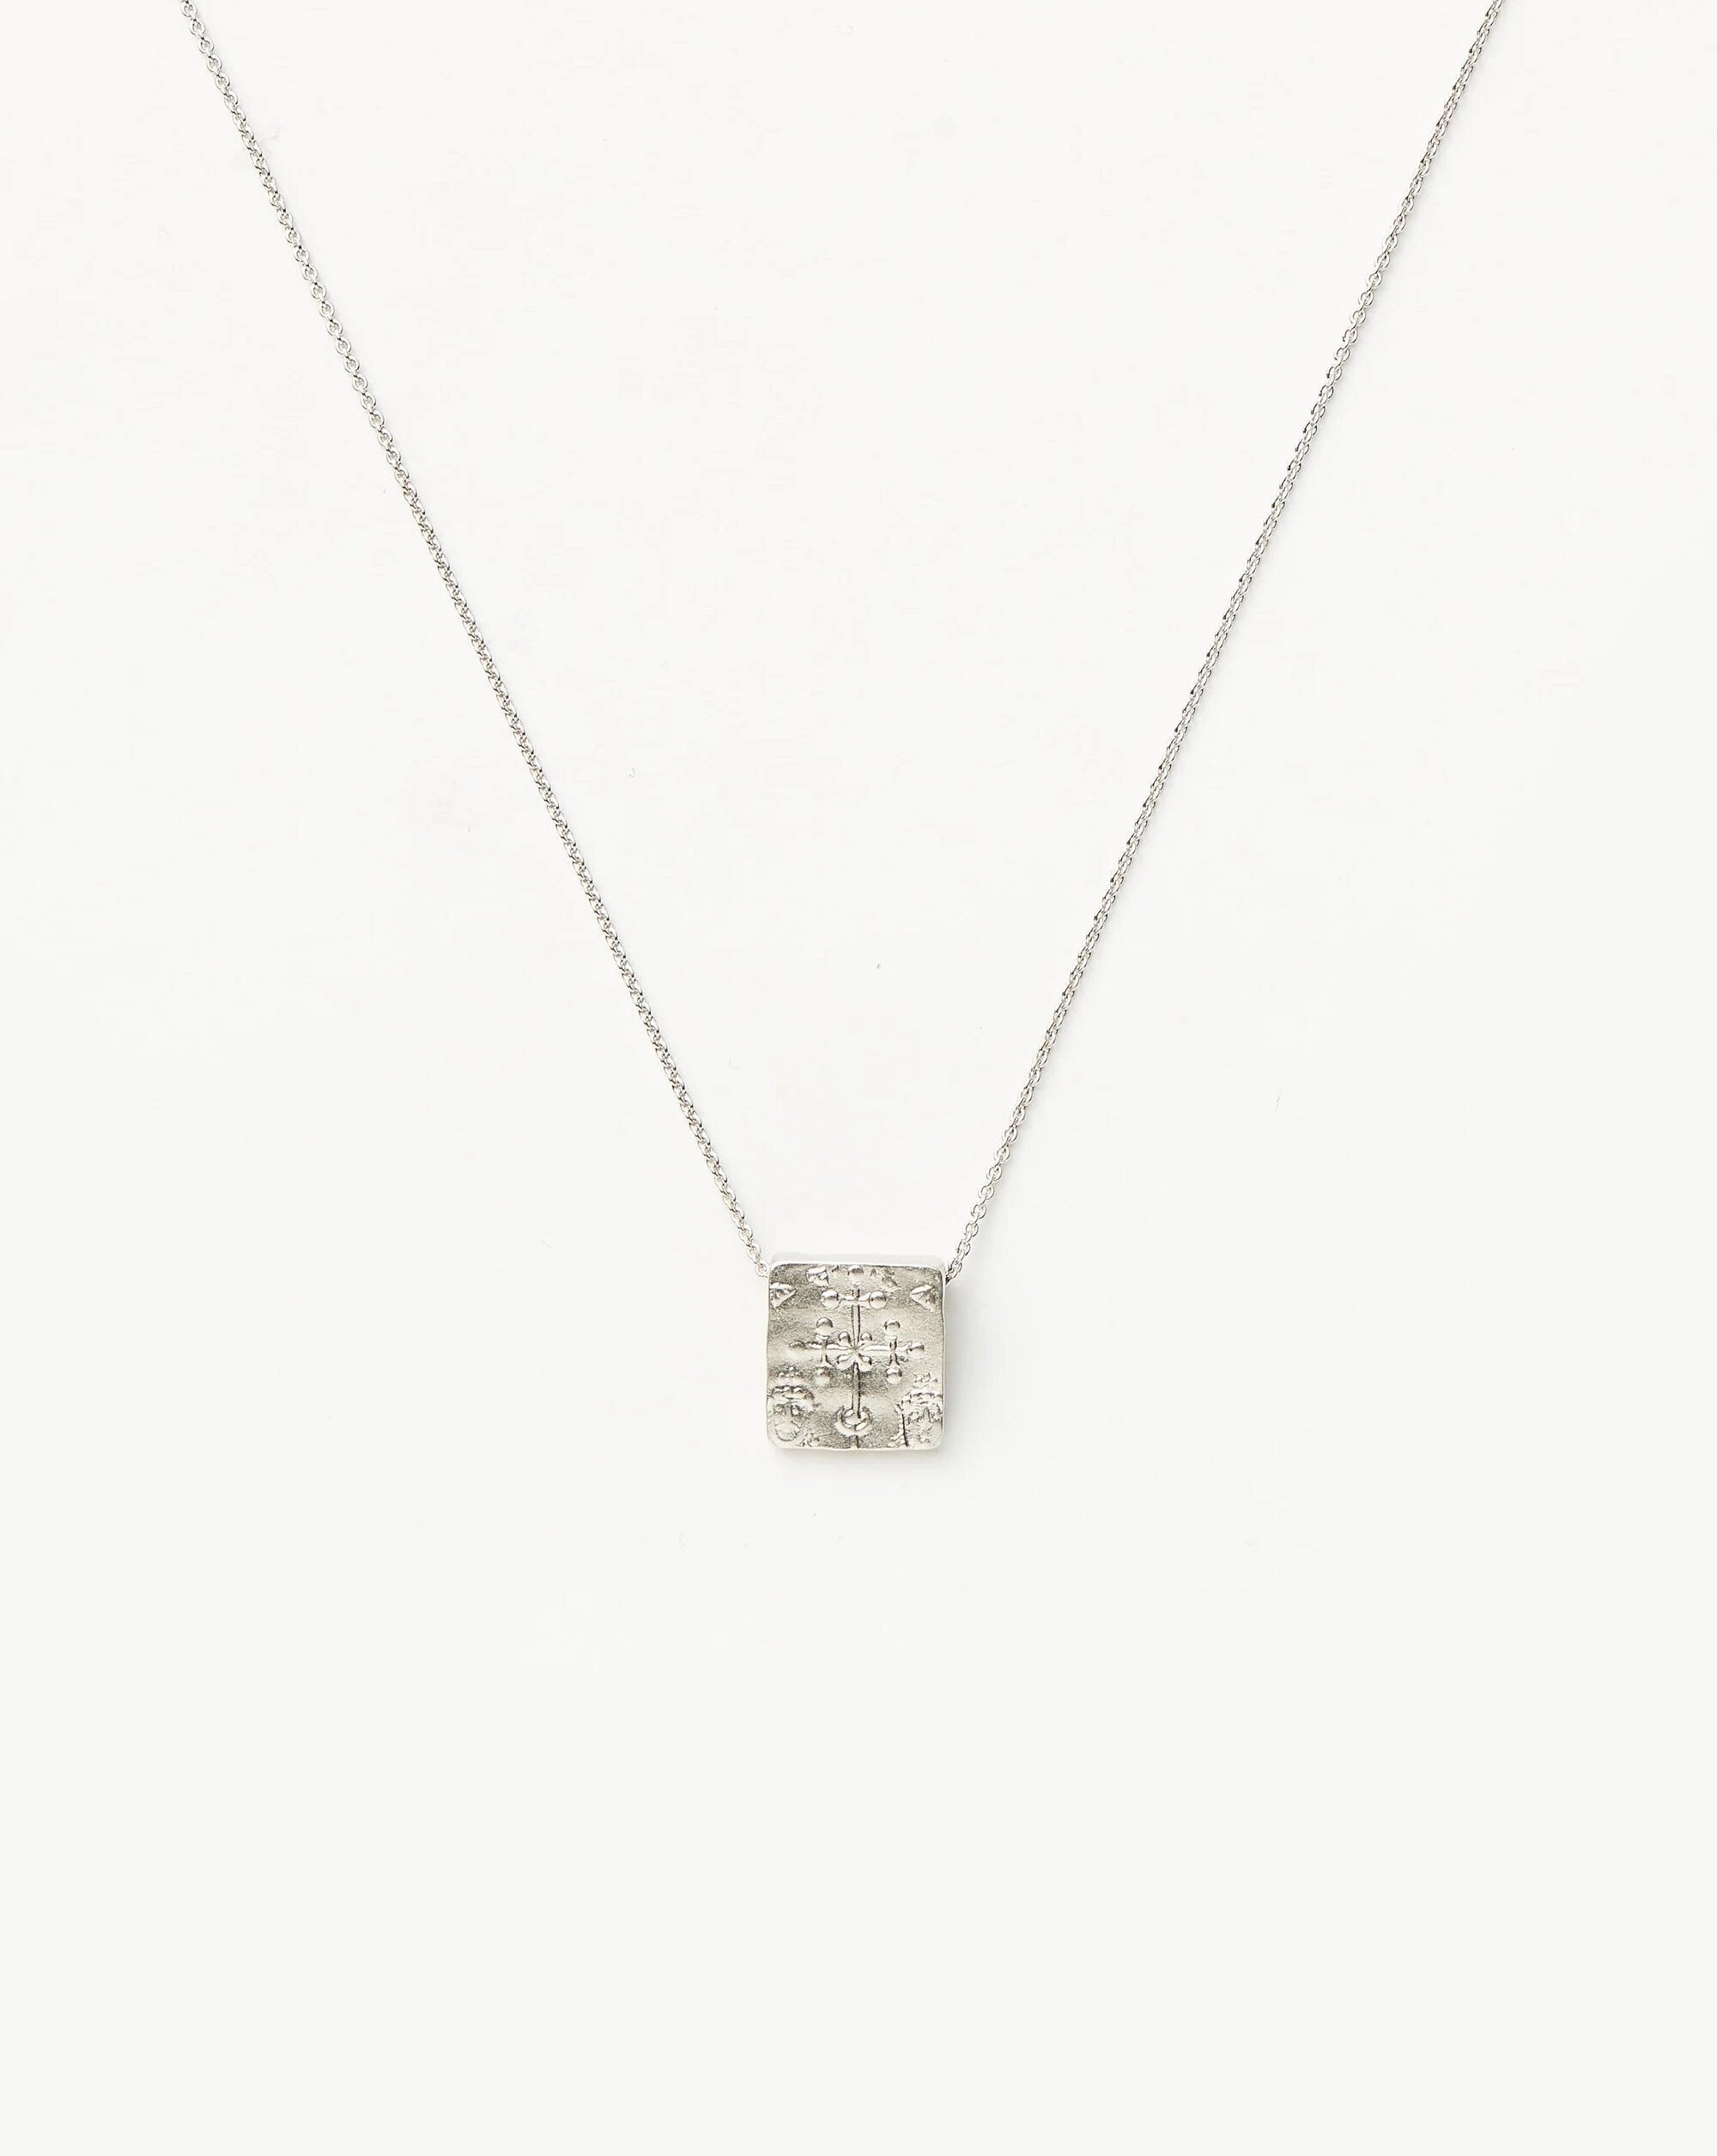 Lucy Williams x Missoma + Byzantine Coin Pendant Necklace